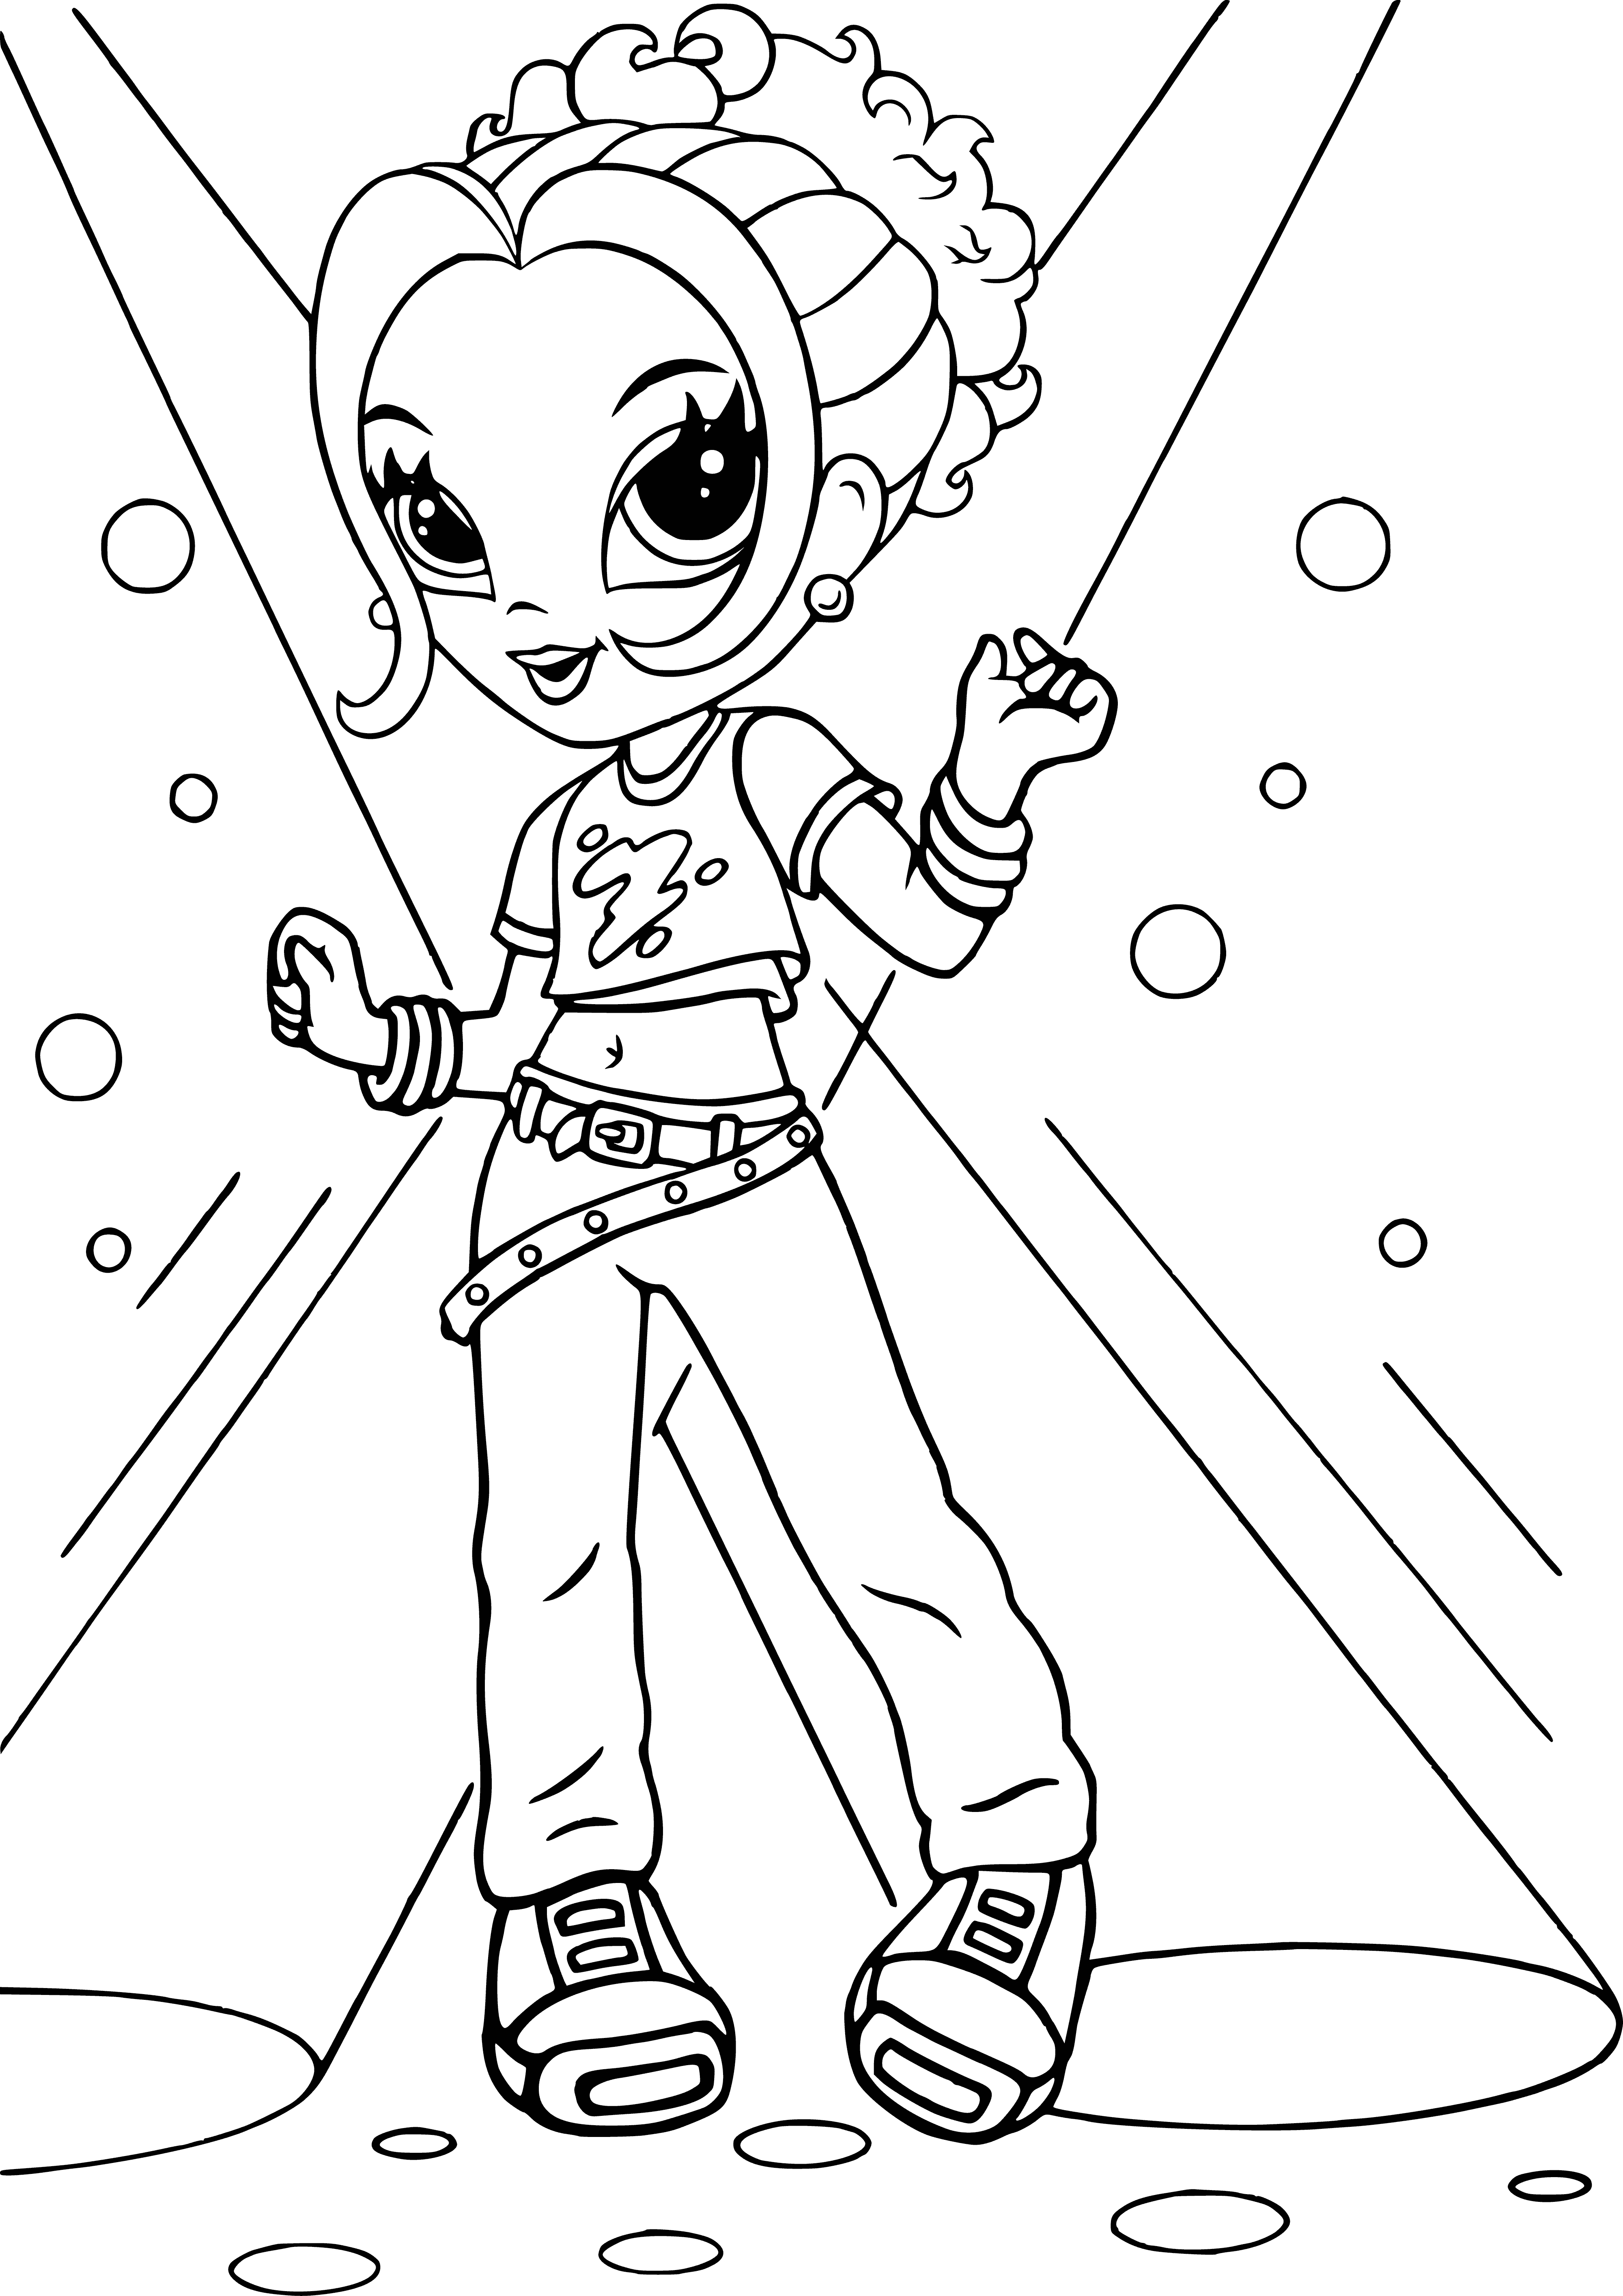 coloring page: Girl excitedly sprays perfume, wearing pink dress, bow and jewelry, looking at herself in the mirror. #girlpower